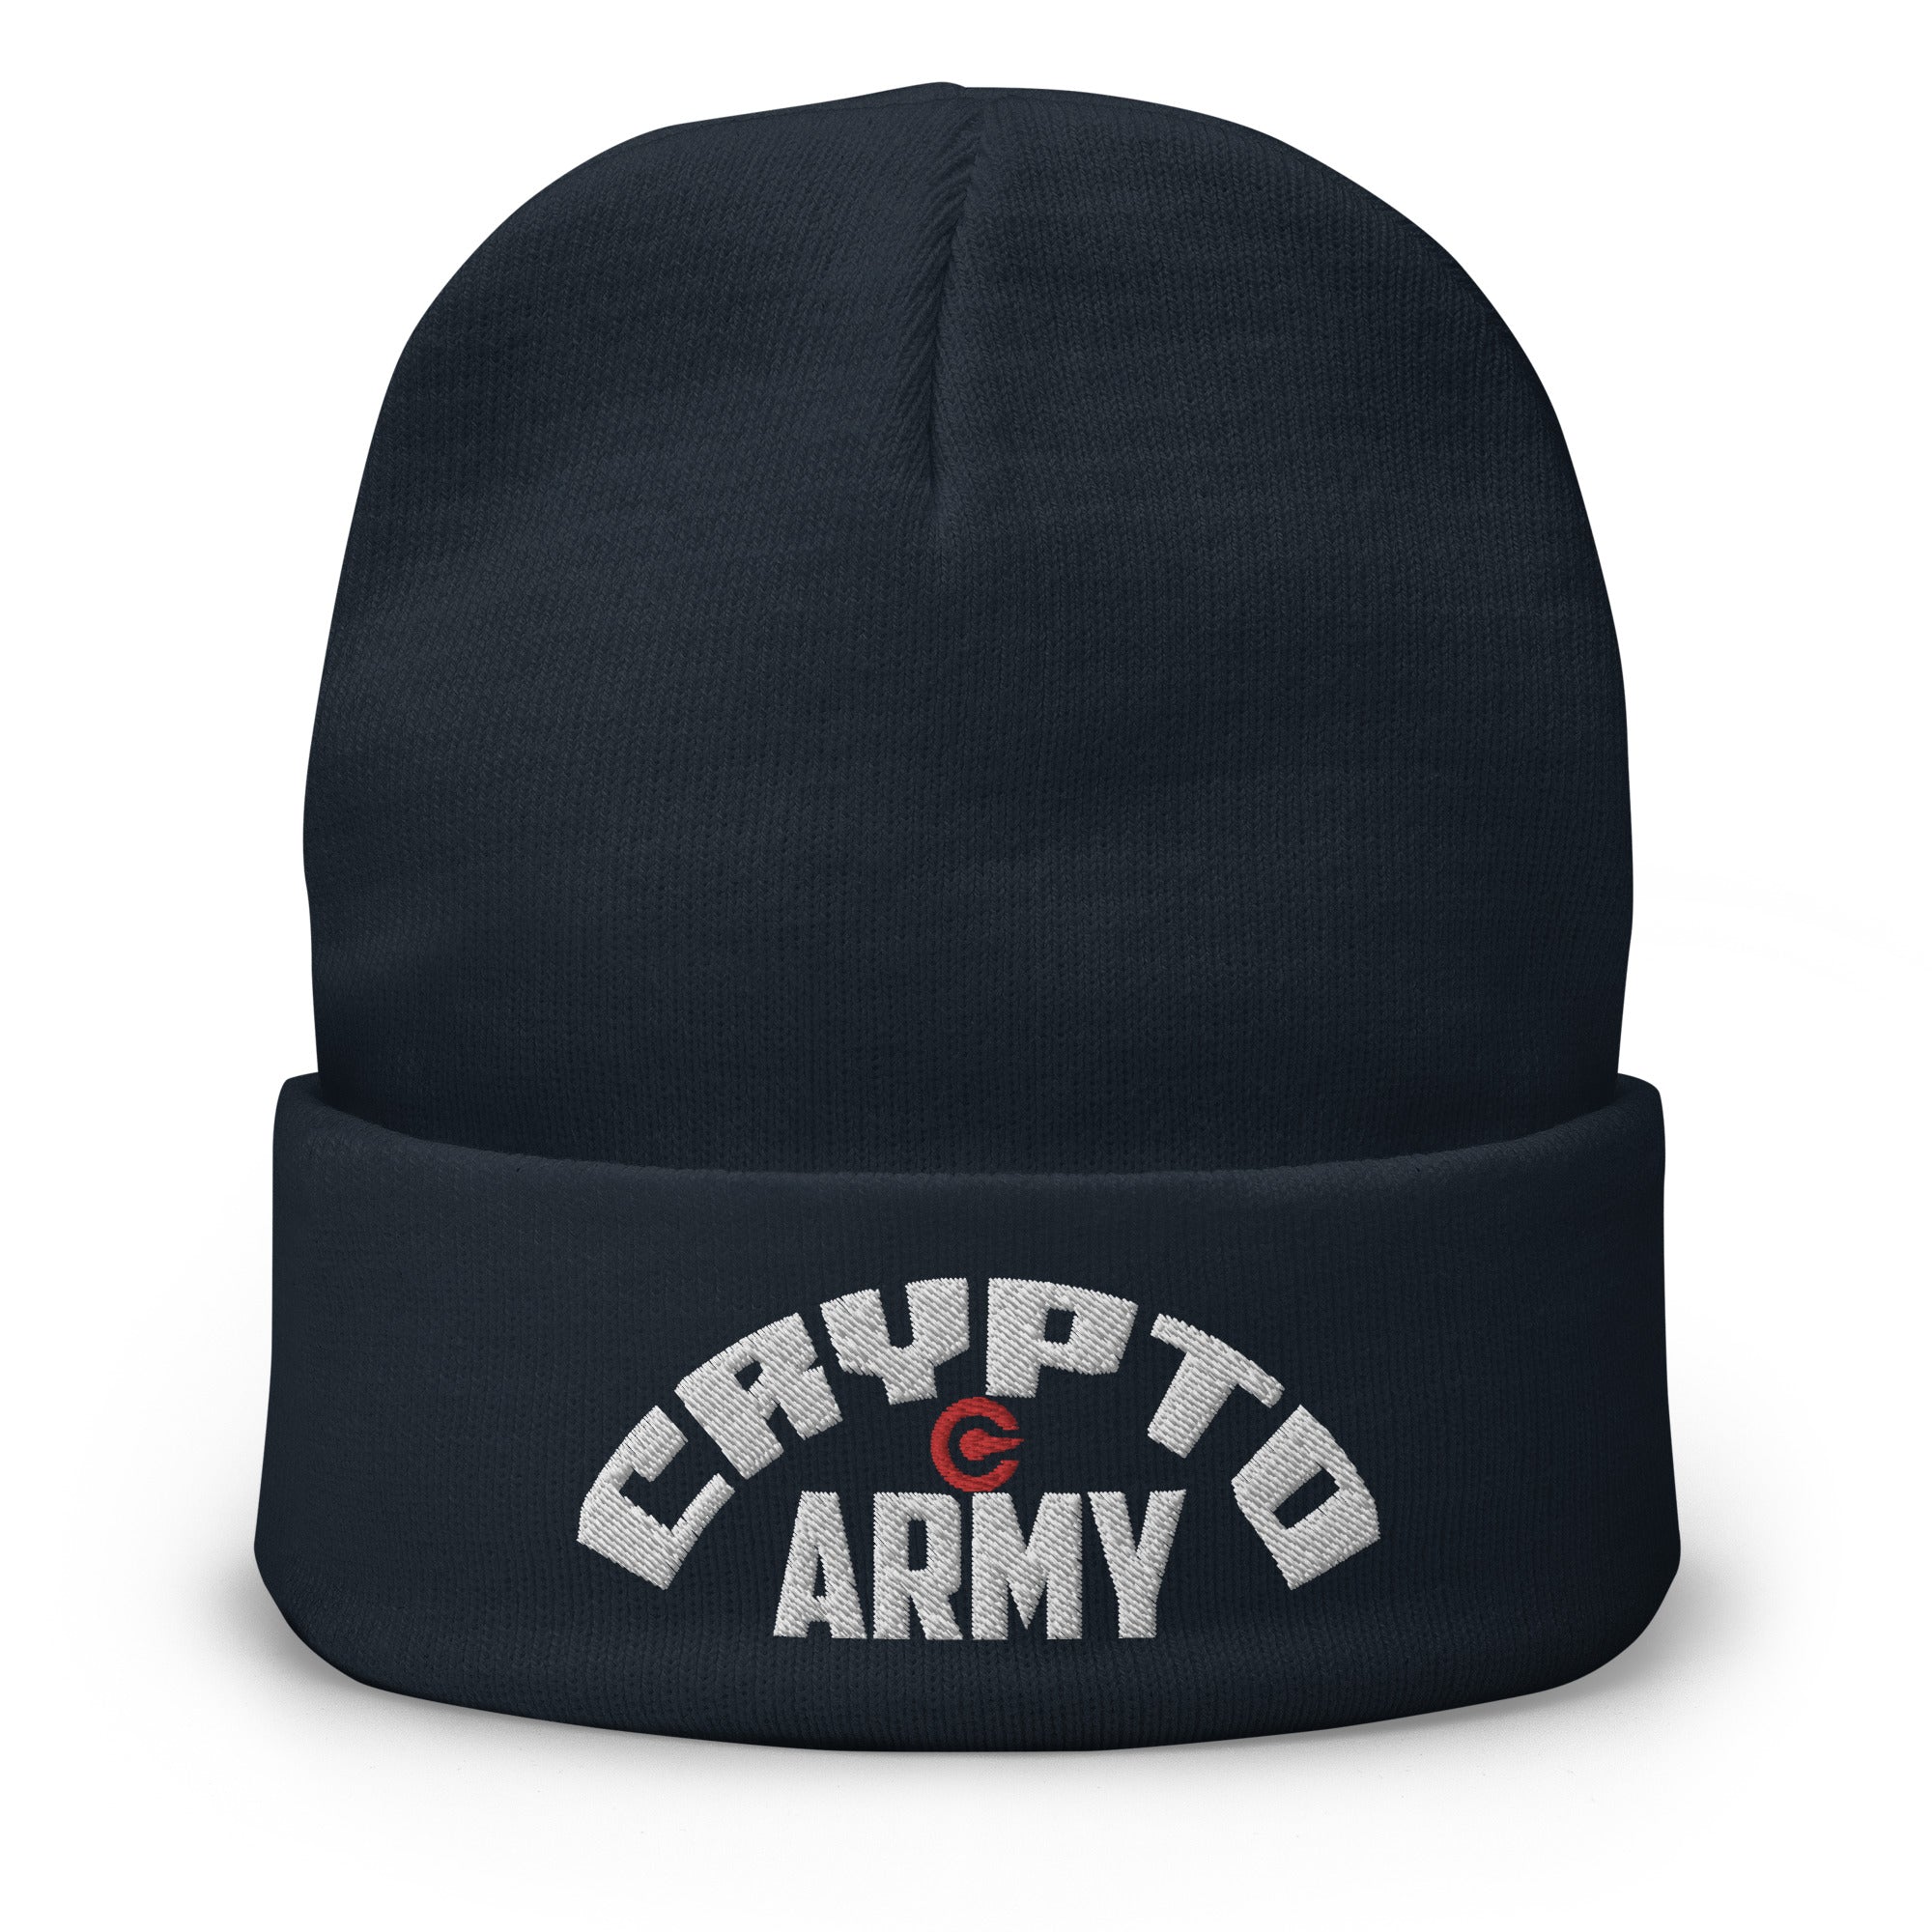 Crypto Army Curved Cryptocurrency Symbol Embroidered Cuff Beanie Cap